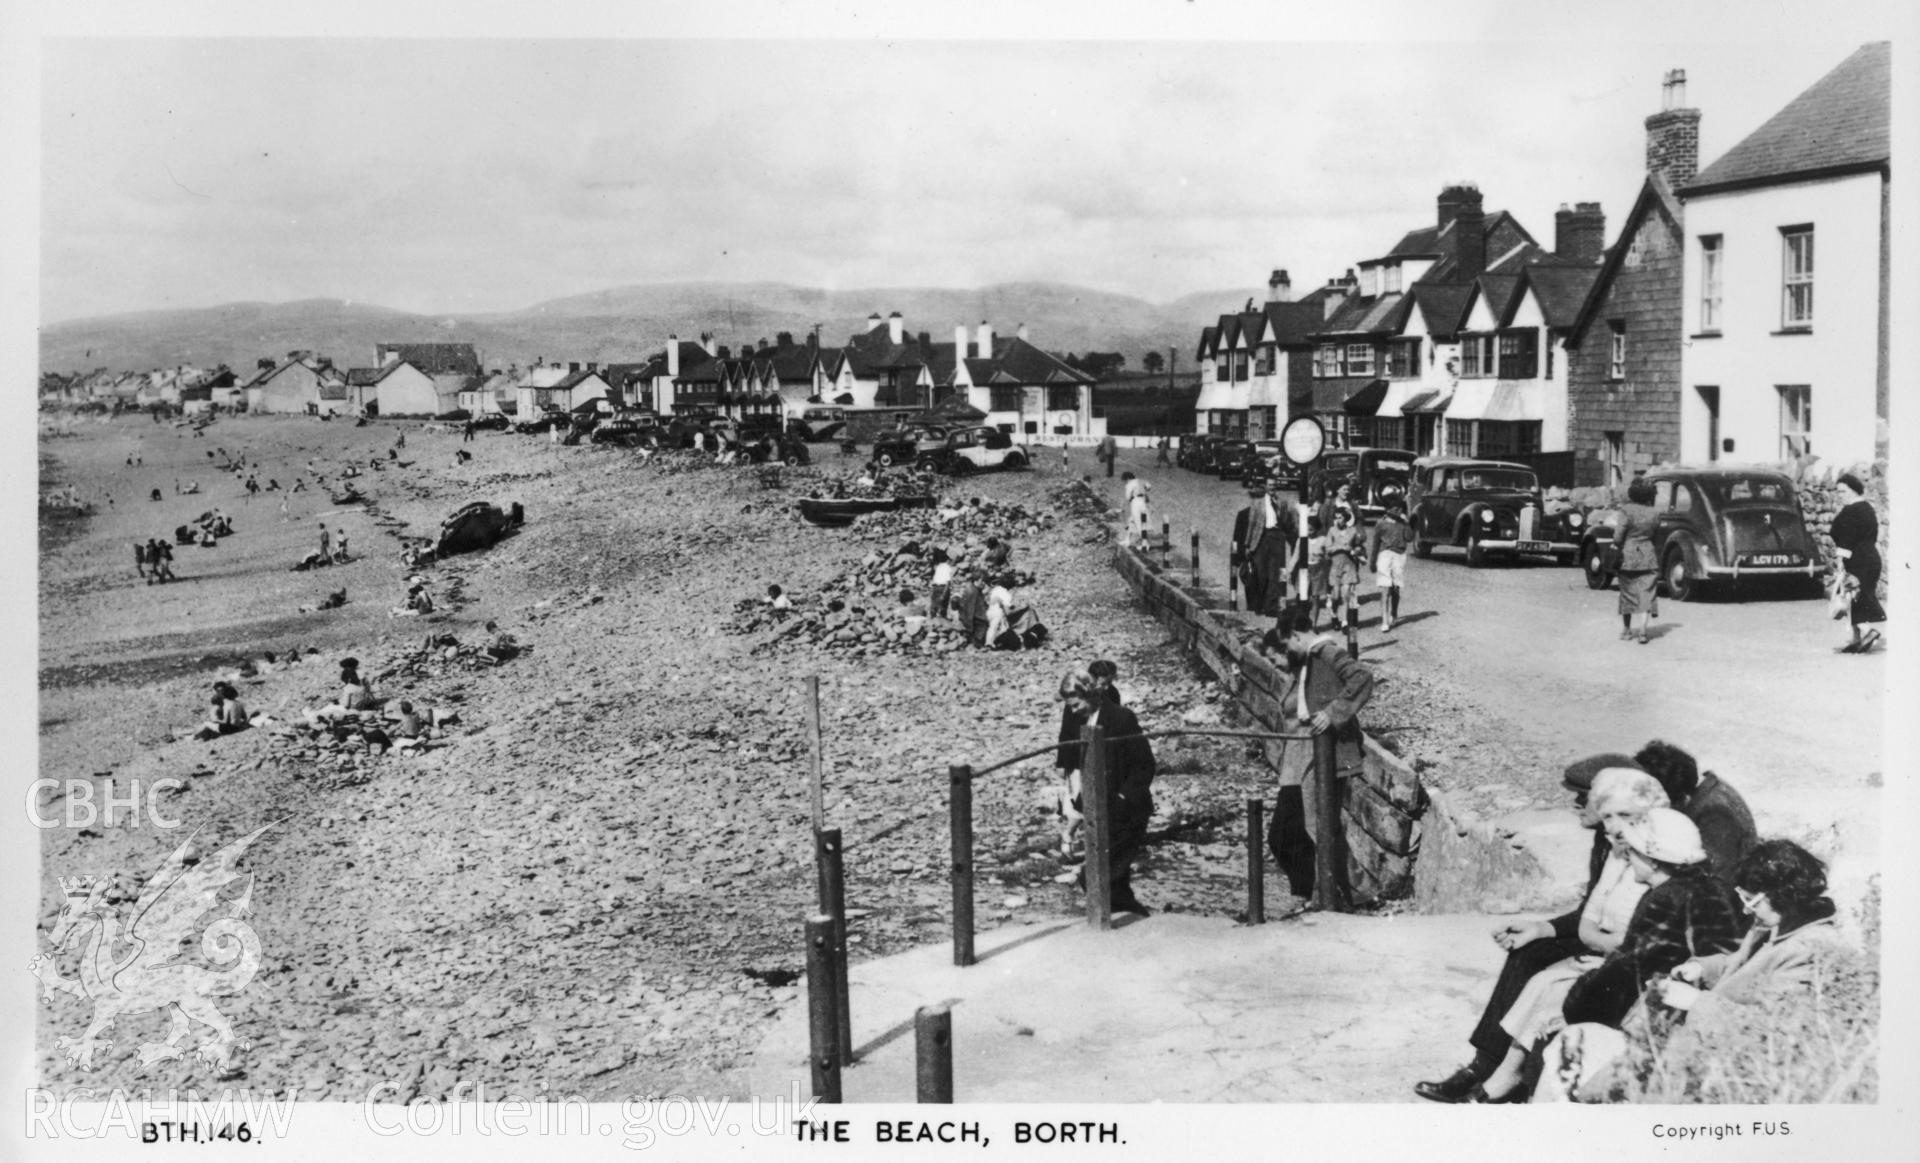 Digital copy of postcard showing The Beach, Borth, dated early 20th century (Publisher: Frith).  Loaned for copying by Charlie Downes.